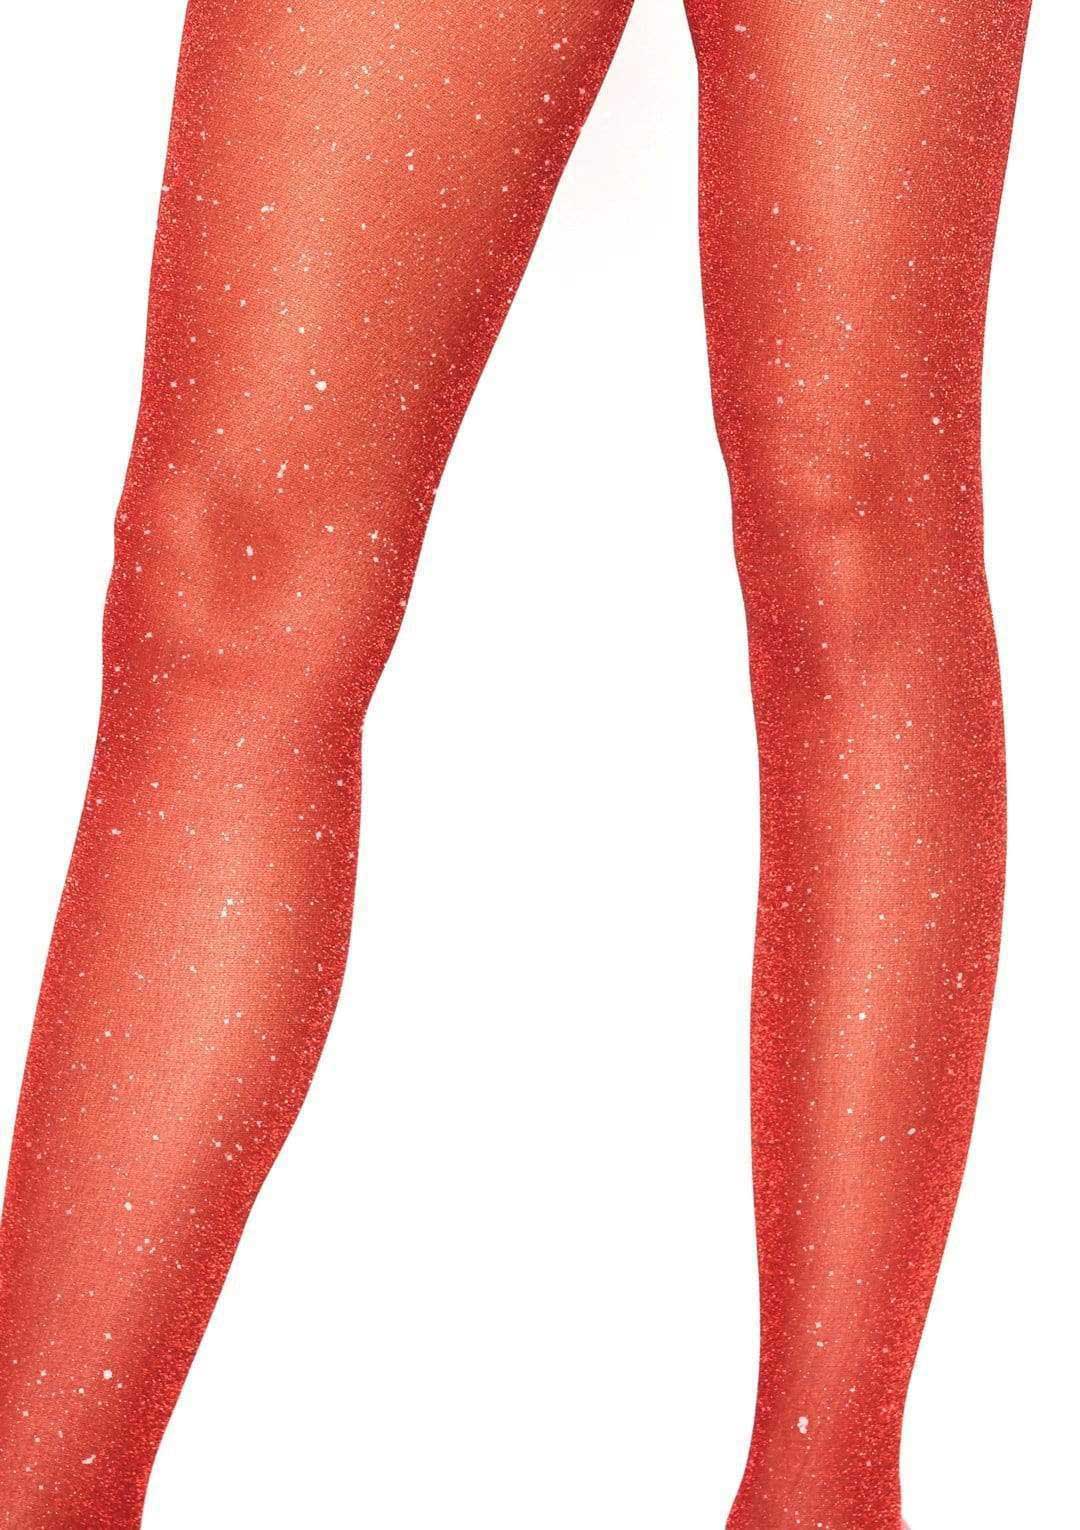 black tights for women, dancing tights for women